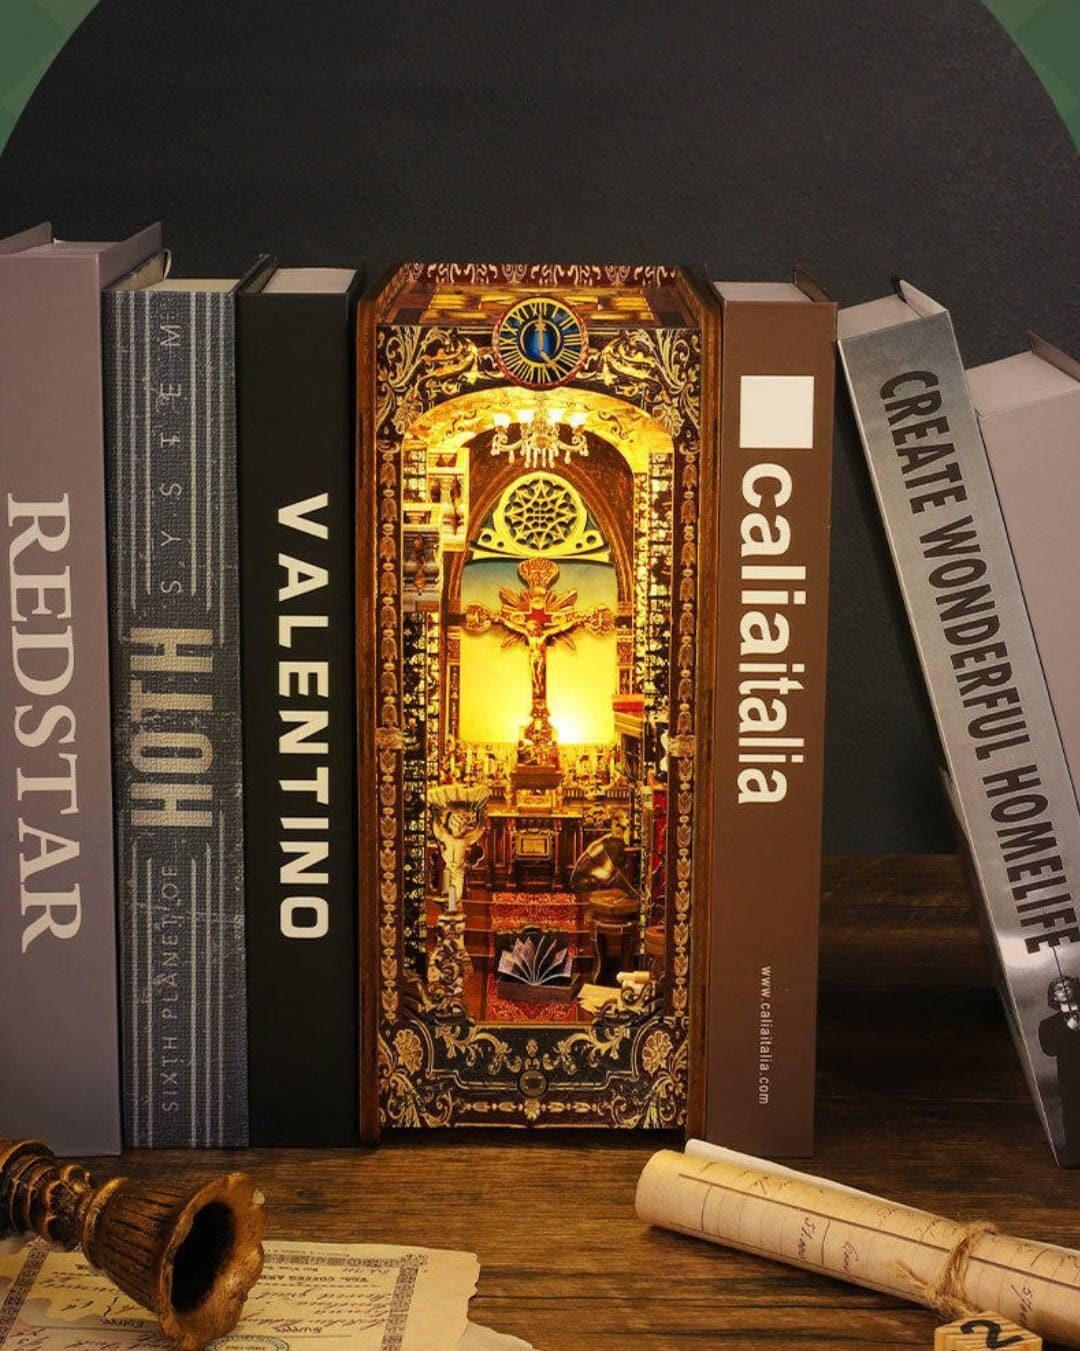 The Cathedral Book Nook - DIY Book Nook Kits Church Book Shelf Insert Book Scenery Bookends Bookcase with Light Model Building Kit - Rajbharti Crafts